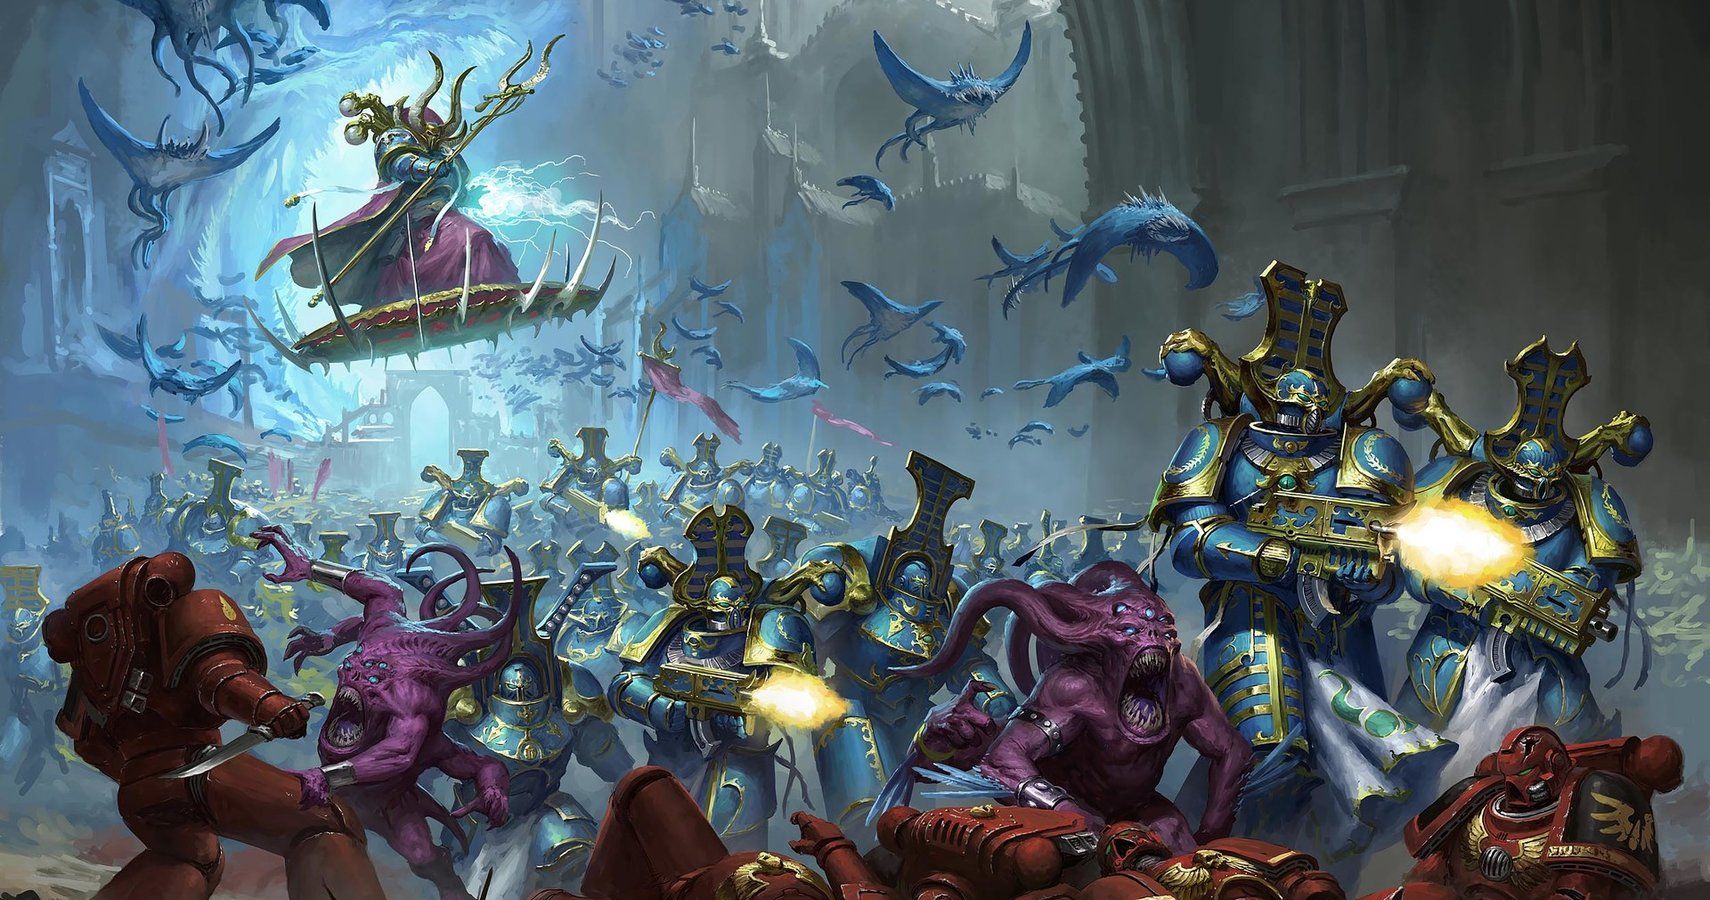 Three Strong Thousand Sons Army Lists - Tournament Rosters for Warhammer 40k  